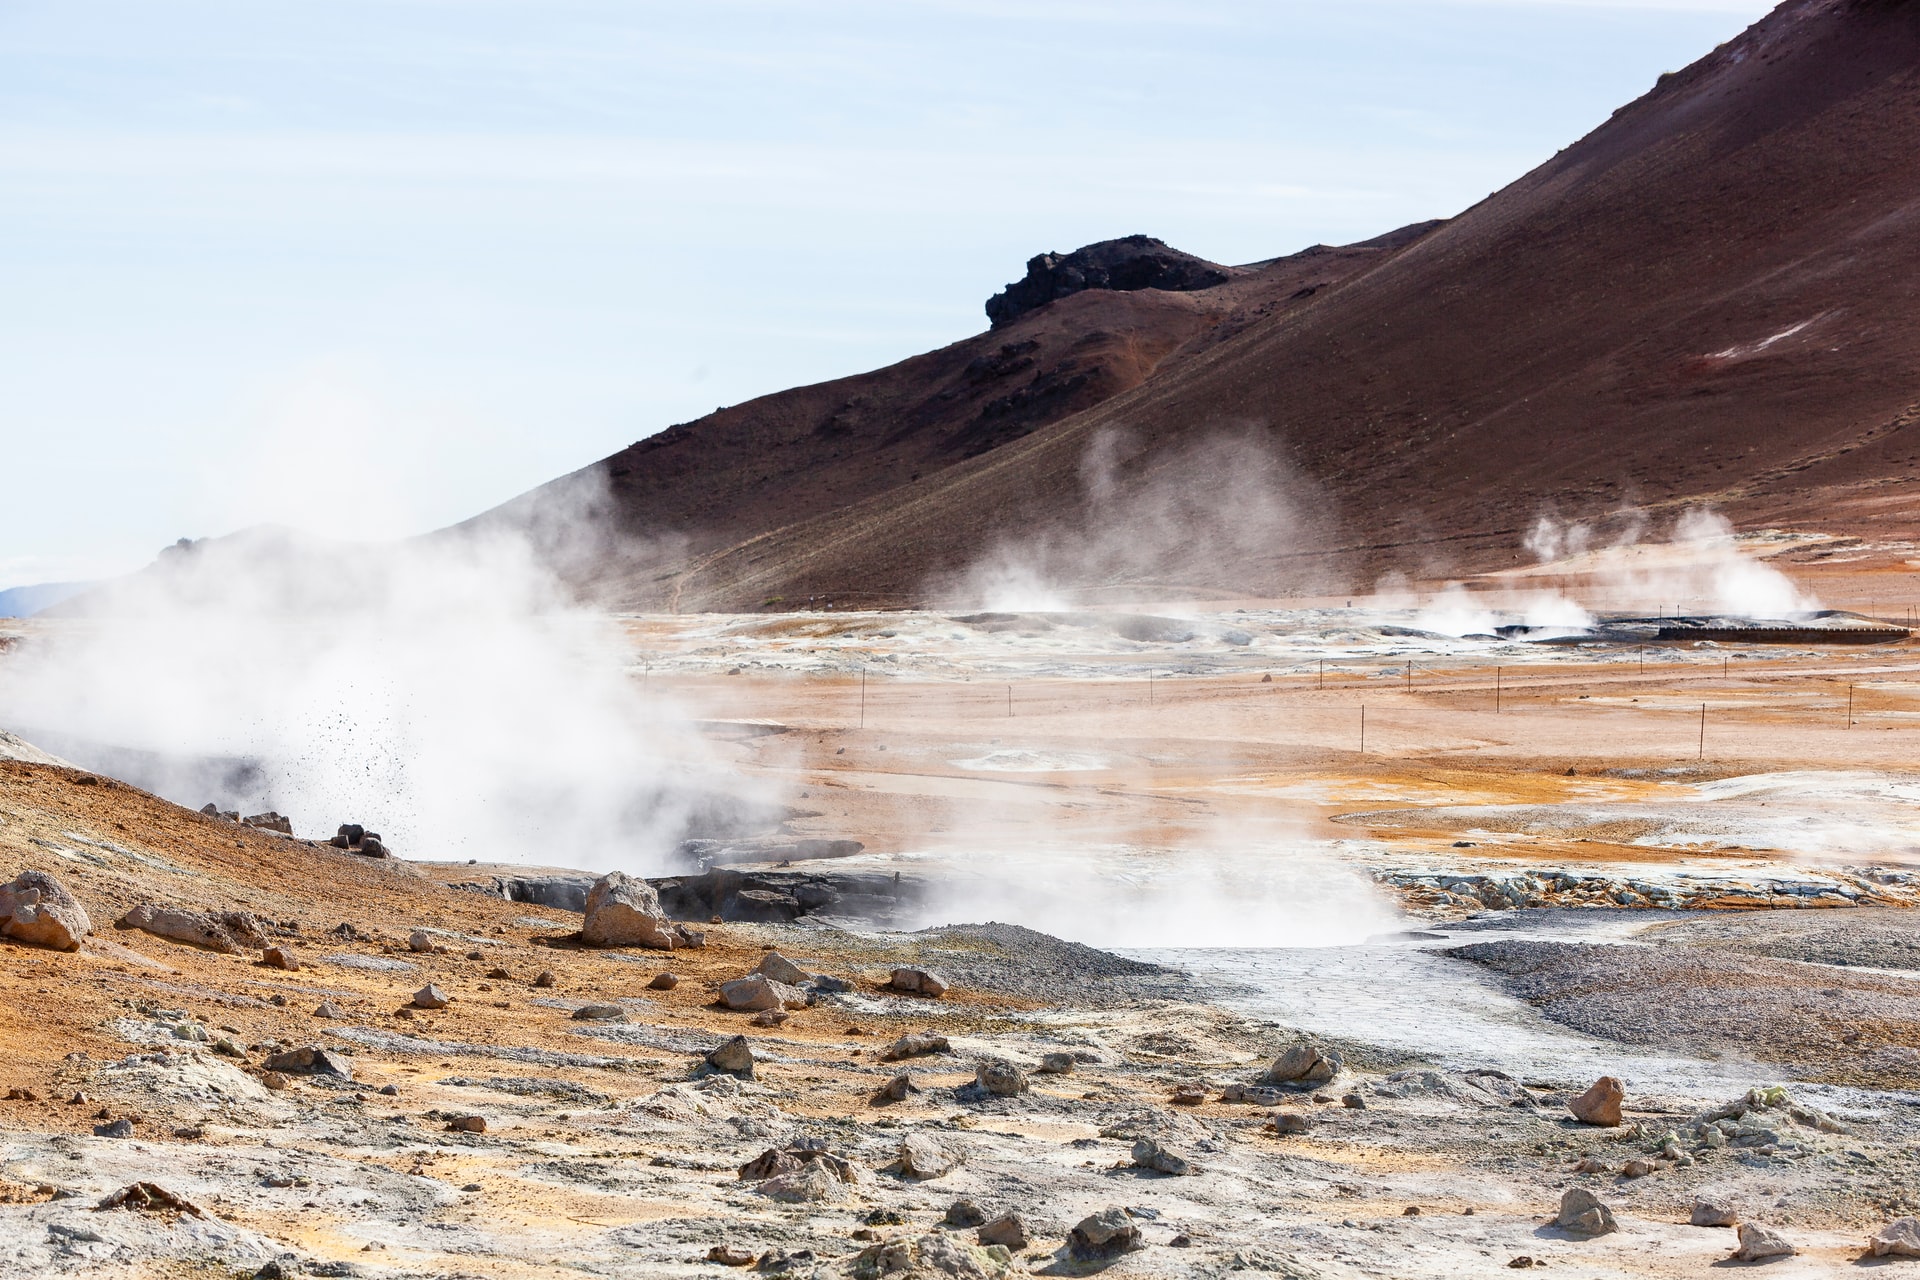 Geothermal energy billows from the ground